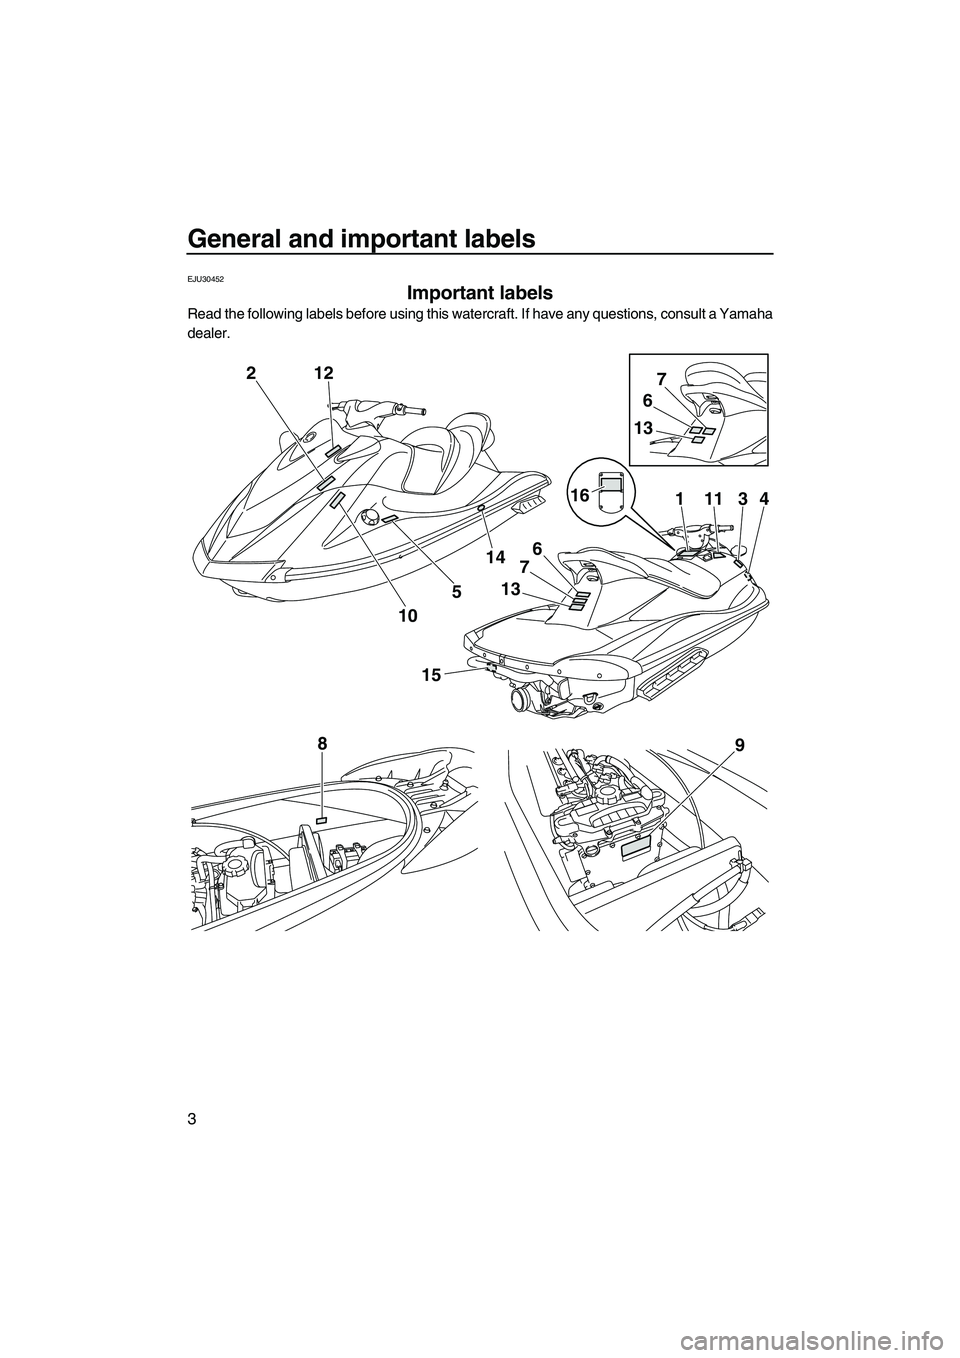 YAMAHA VX SPORT 2010  Owners Manual General and important labels
3
EJU30452
Important labels 
Read the following labels before using this watercraft. If have any questions, consult a Yamaha
dealer.
2
15
98
13
6
7
16
6
7
13
11134
12
10
5